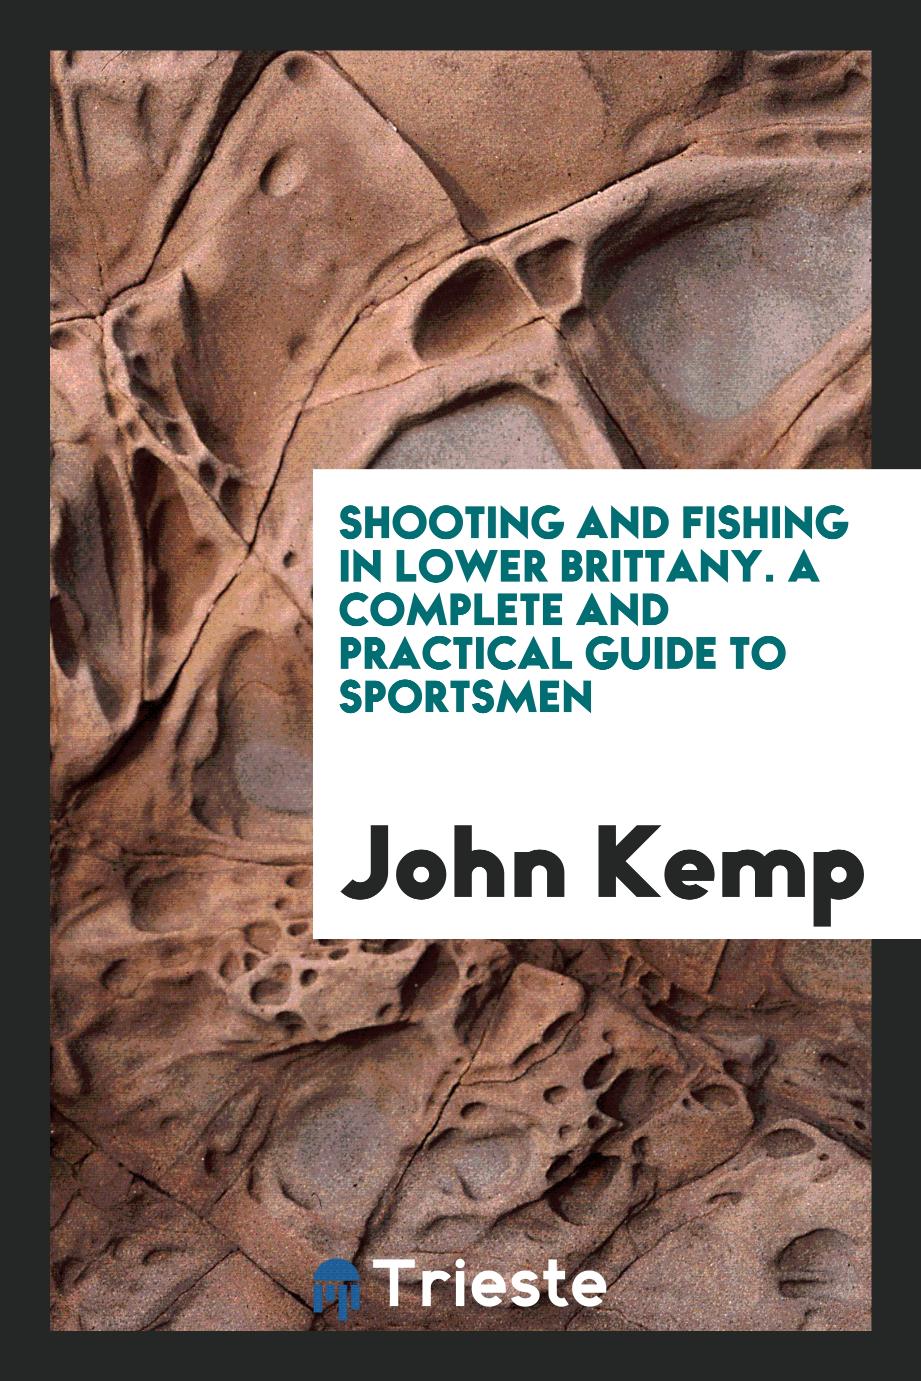 Shooting and fishing in lower Brittany. A complete and practical guide to sportsmen